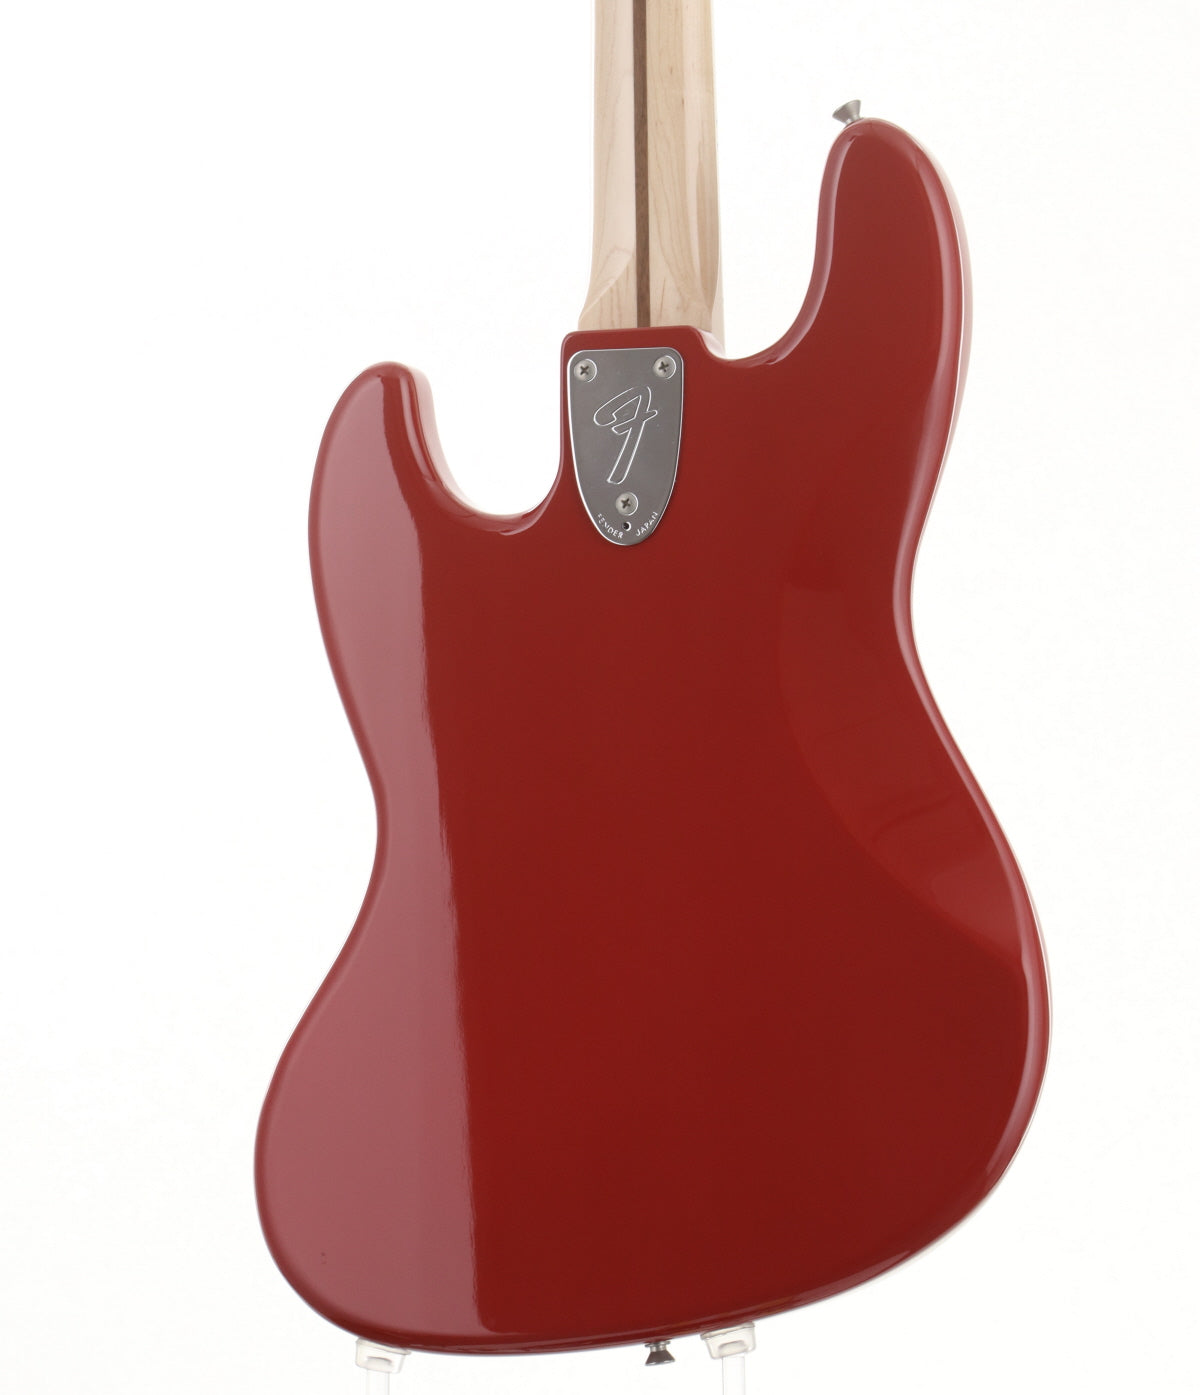 [SN JD17034588] USED Fender / Made in Japan Traditional 70s Jazz Bass Torino Red Maple Fingerboard 2017 [09]